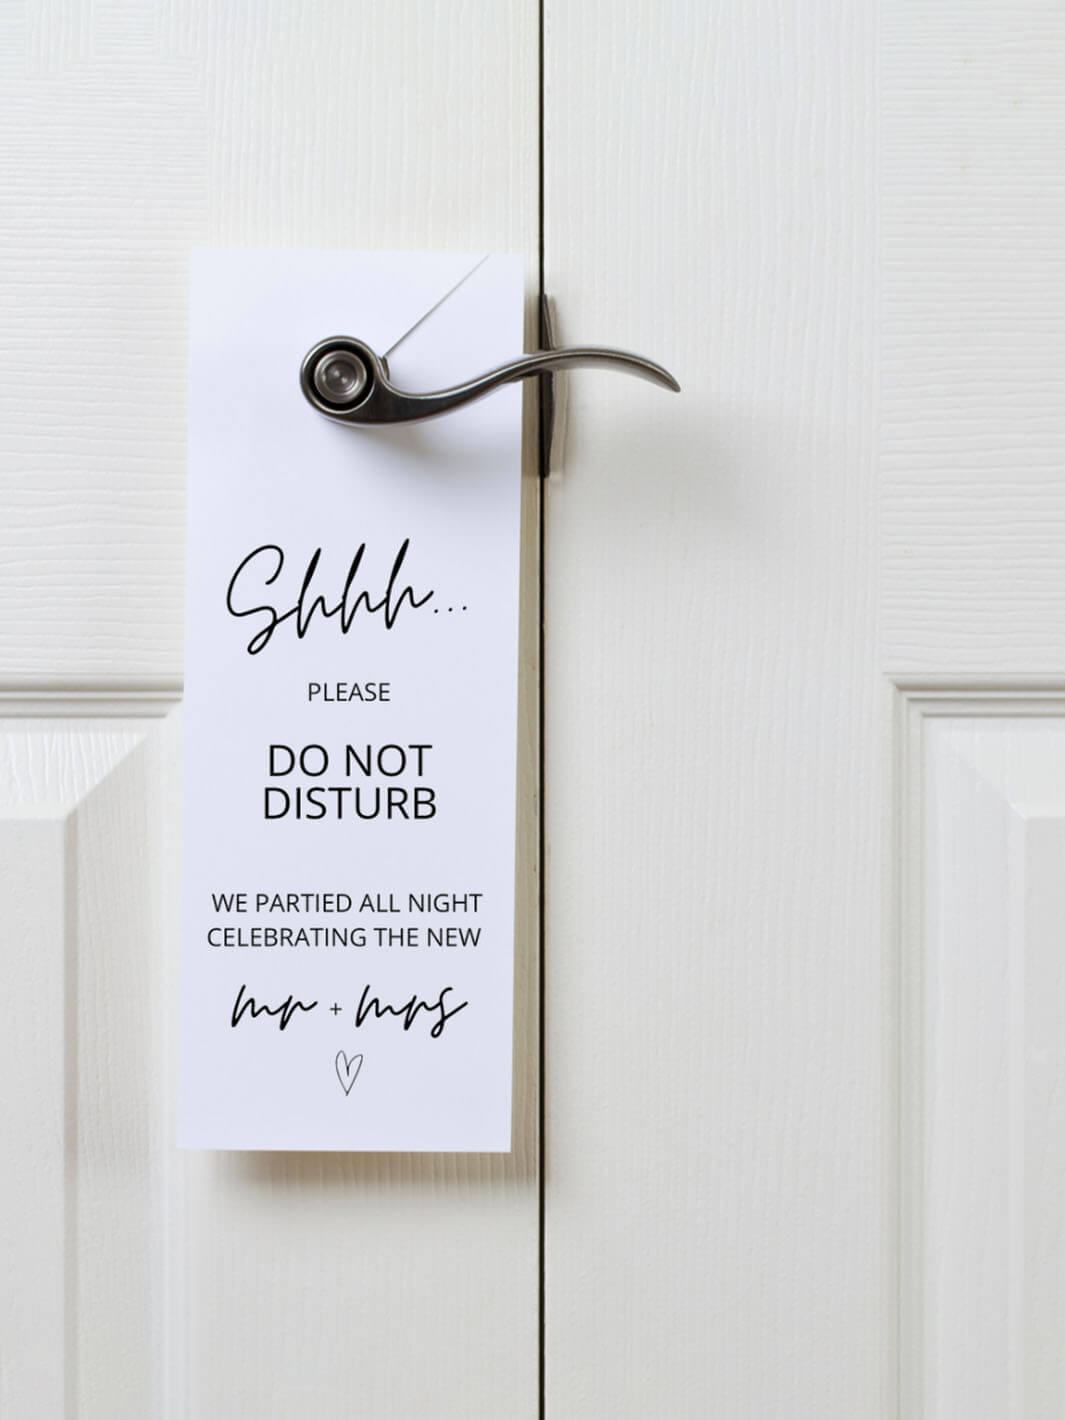 we partied all night because we're celebrating the new Mr. and Mrs. door hanger